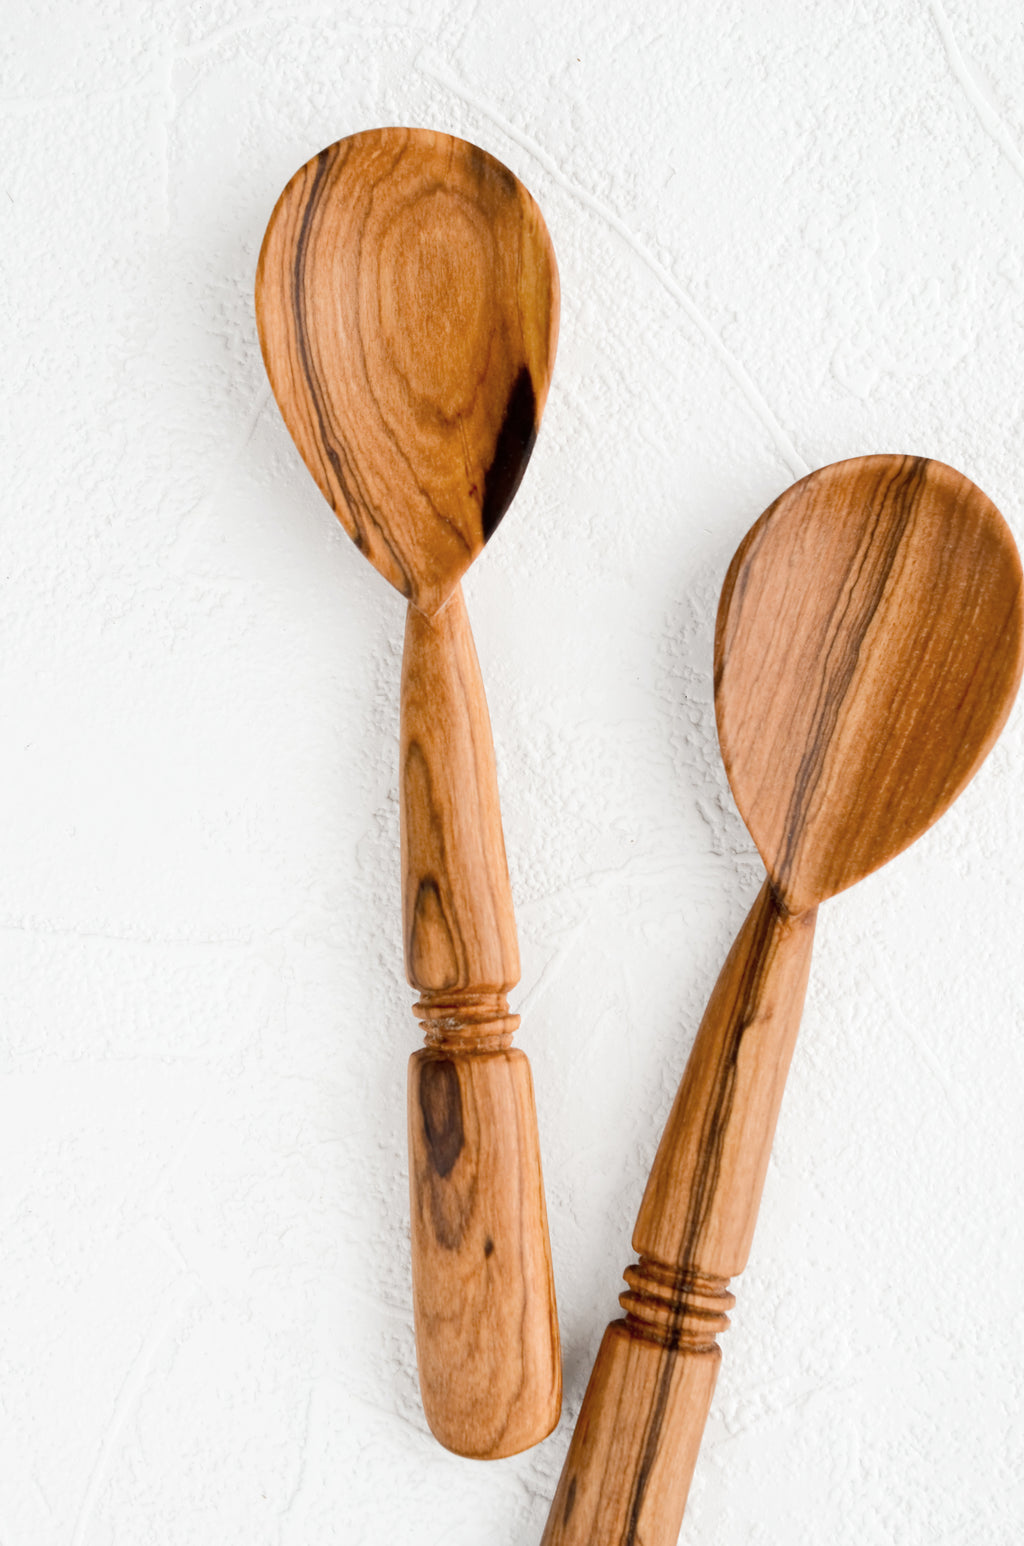 1: Two hand-carved spoons made from olivewood, each with its own unique grain pattern.